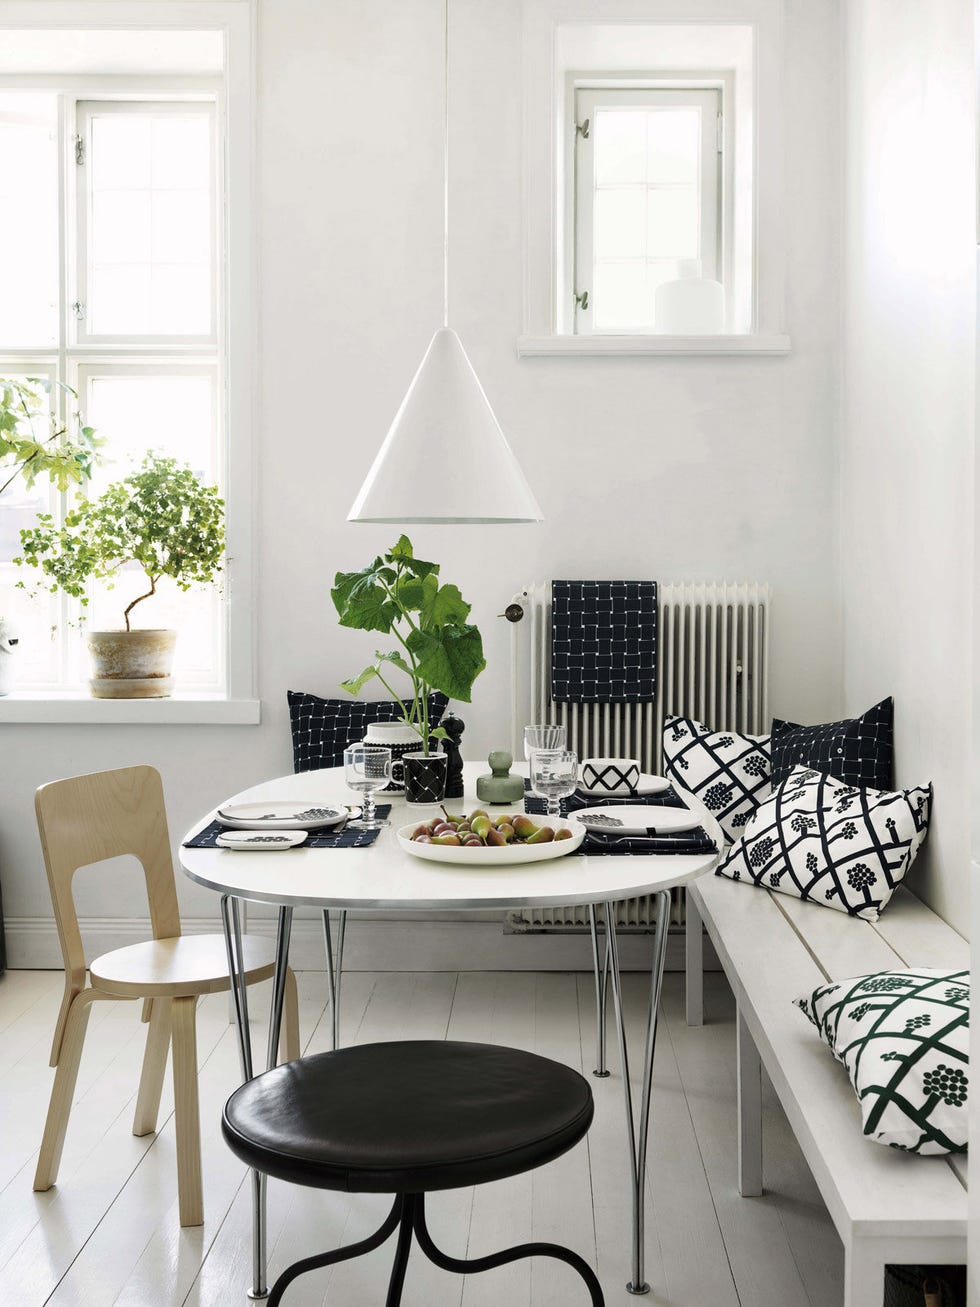 Room, Green, Interior design, Window, Table, Floor, Furniture, Home, White, Wall, 